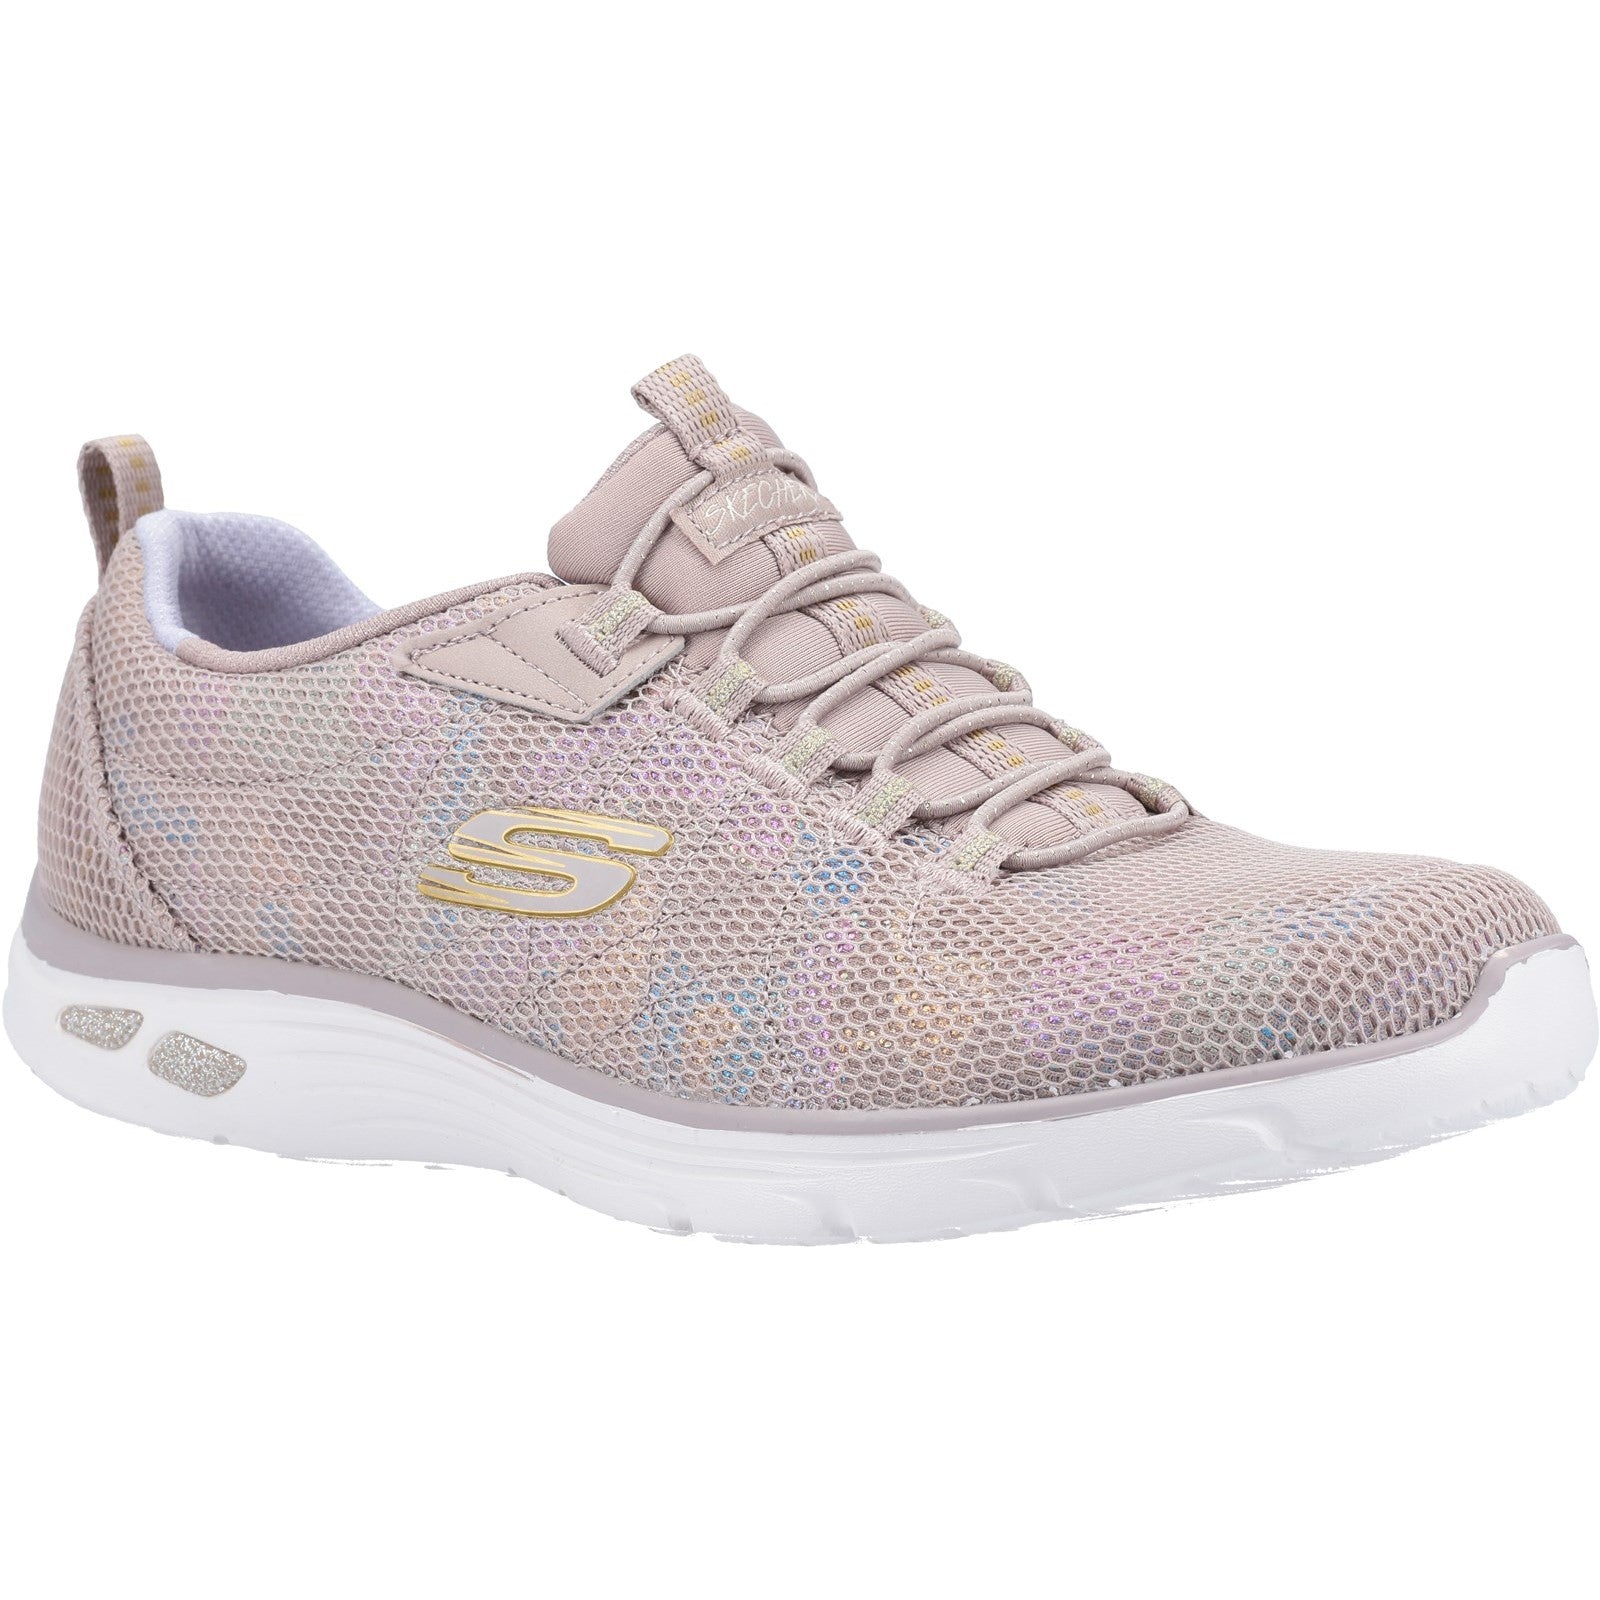 Skechers Relaxed Fit Empire D'Lux Bungee Laced Trainer